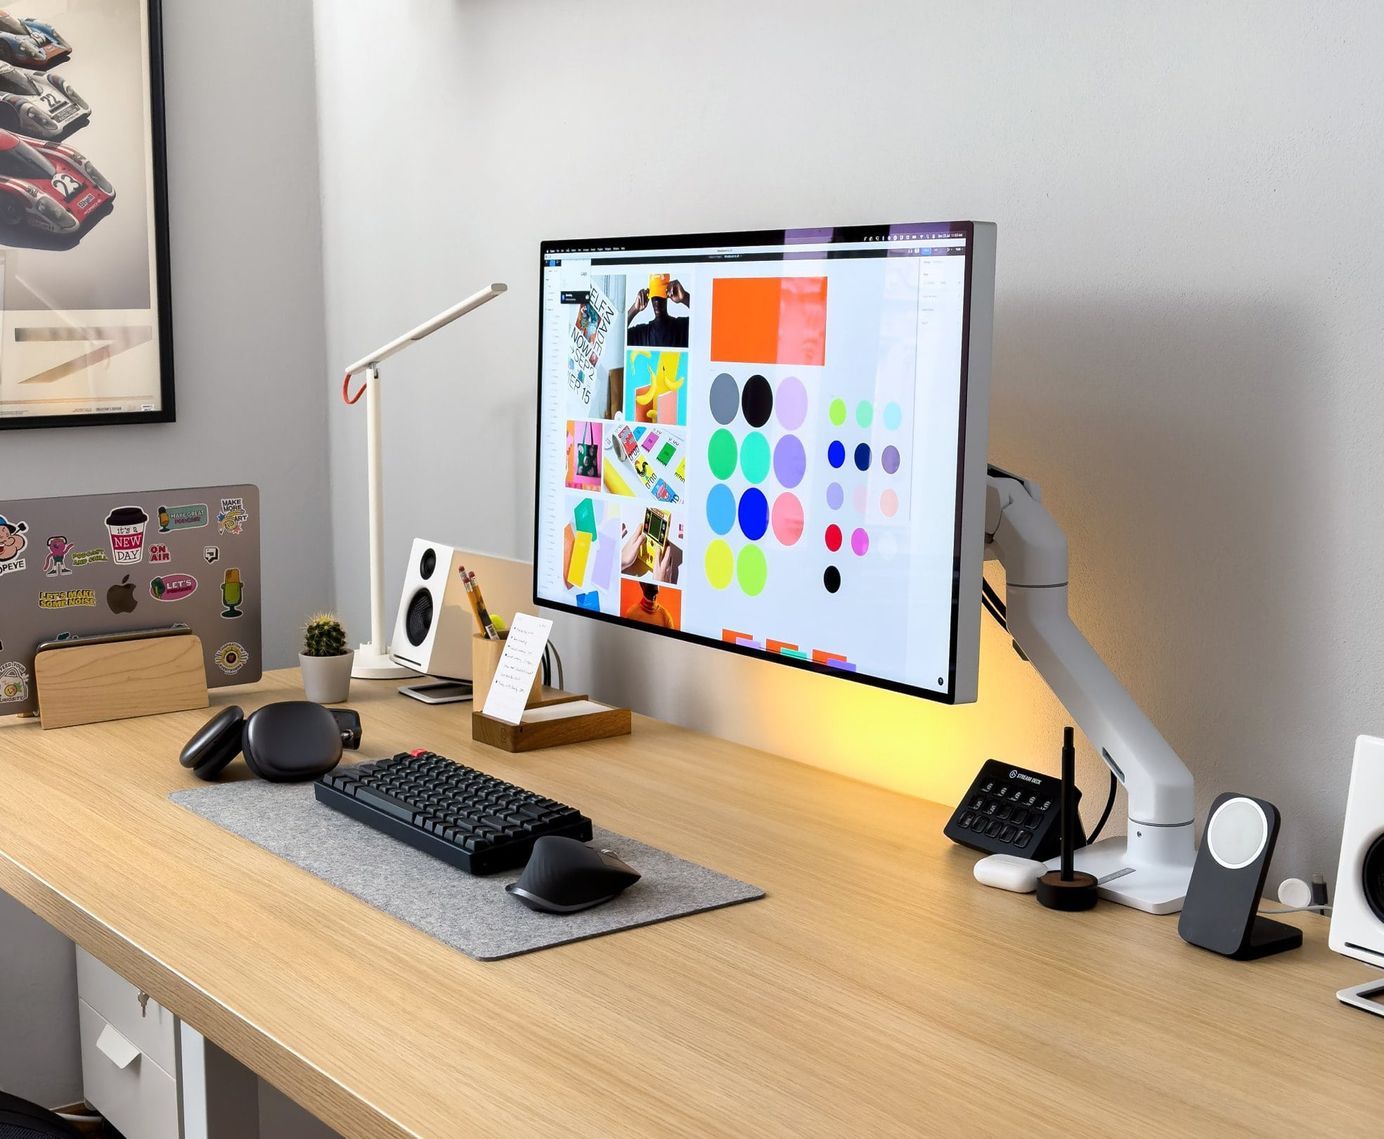 A modern and well-organised minimal desk setup with a large monitor displaying a colourful graphic design project, a sleek white desk lamp, speakers, a black mechanical keyboard and mouse, a notebook, potted plant, and various desk accessories in a bright room